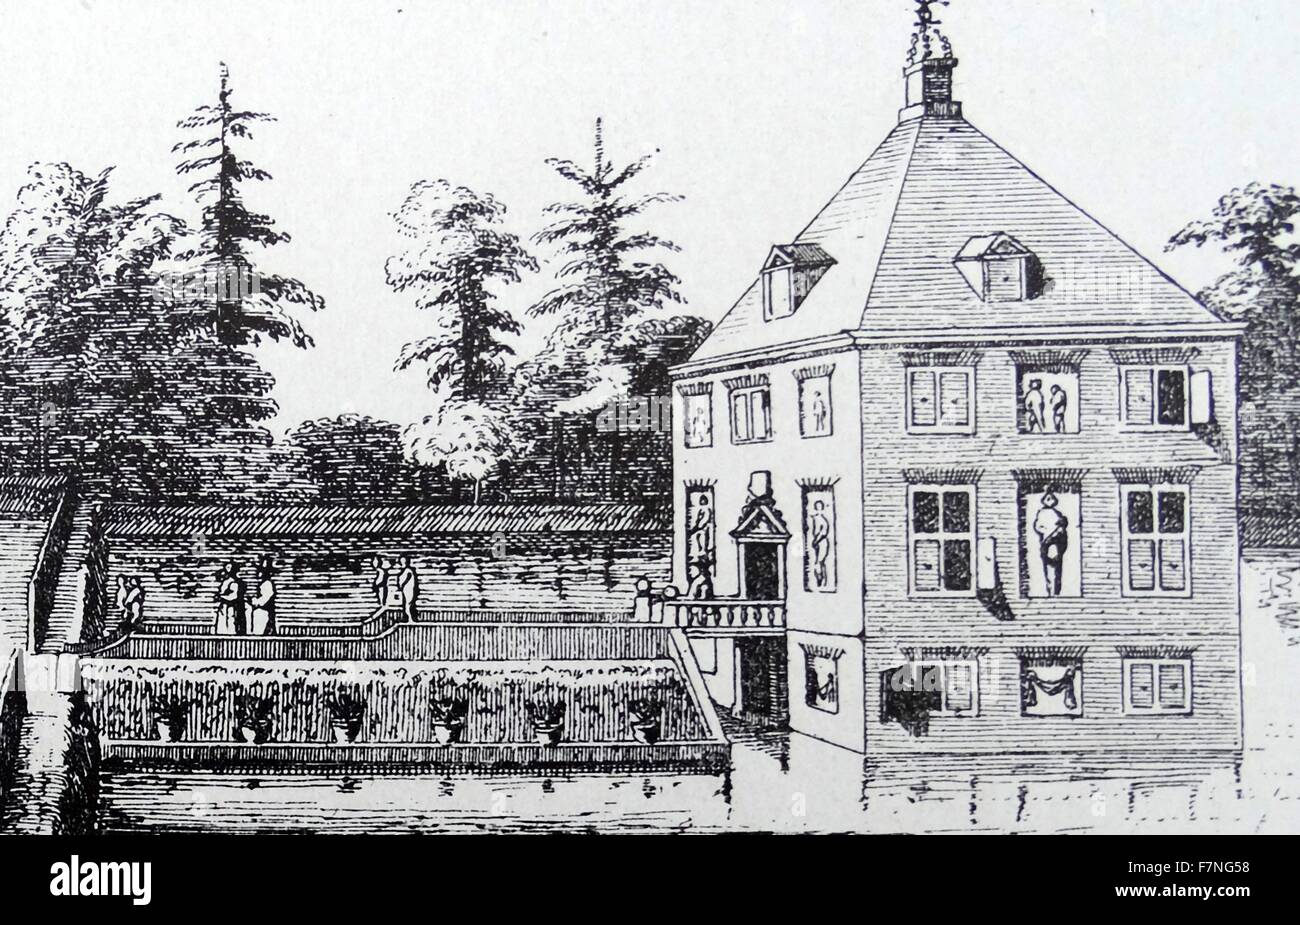 Hofwijk was the country retreat of Constantijn Huygens (1596-1687).  We show the construction, the house and a floor plan of the house Huygens built in 1641 on the Vliet, near the Hague.  The house still exists, but the whole environment has changed. Stock Photo